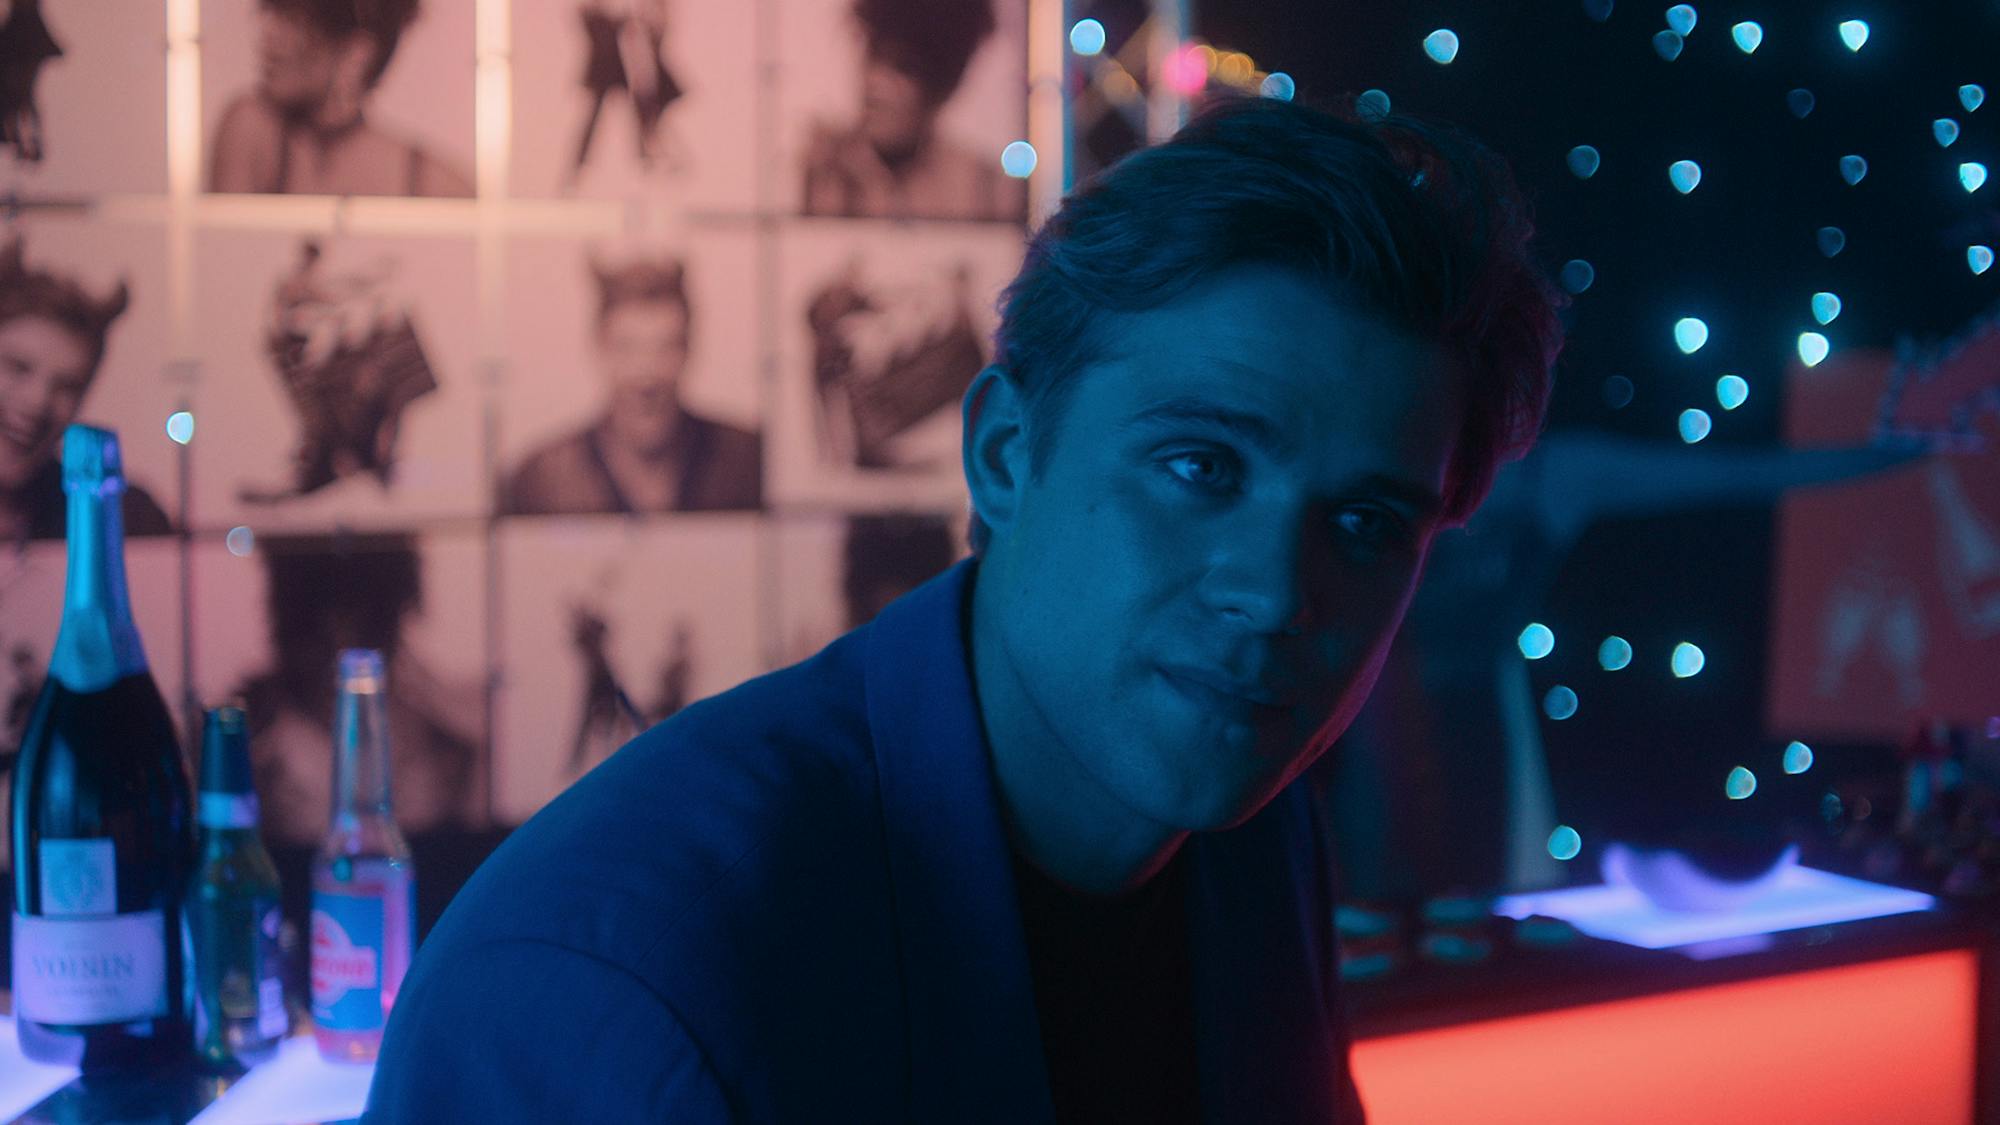 Dexter Mayhew (Leo Woodall) sits in a dark club, with drinks and pictures of himself in the background